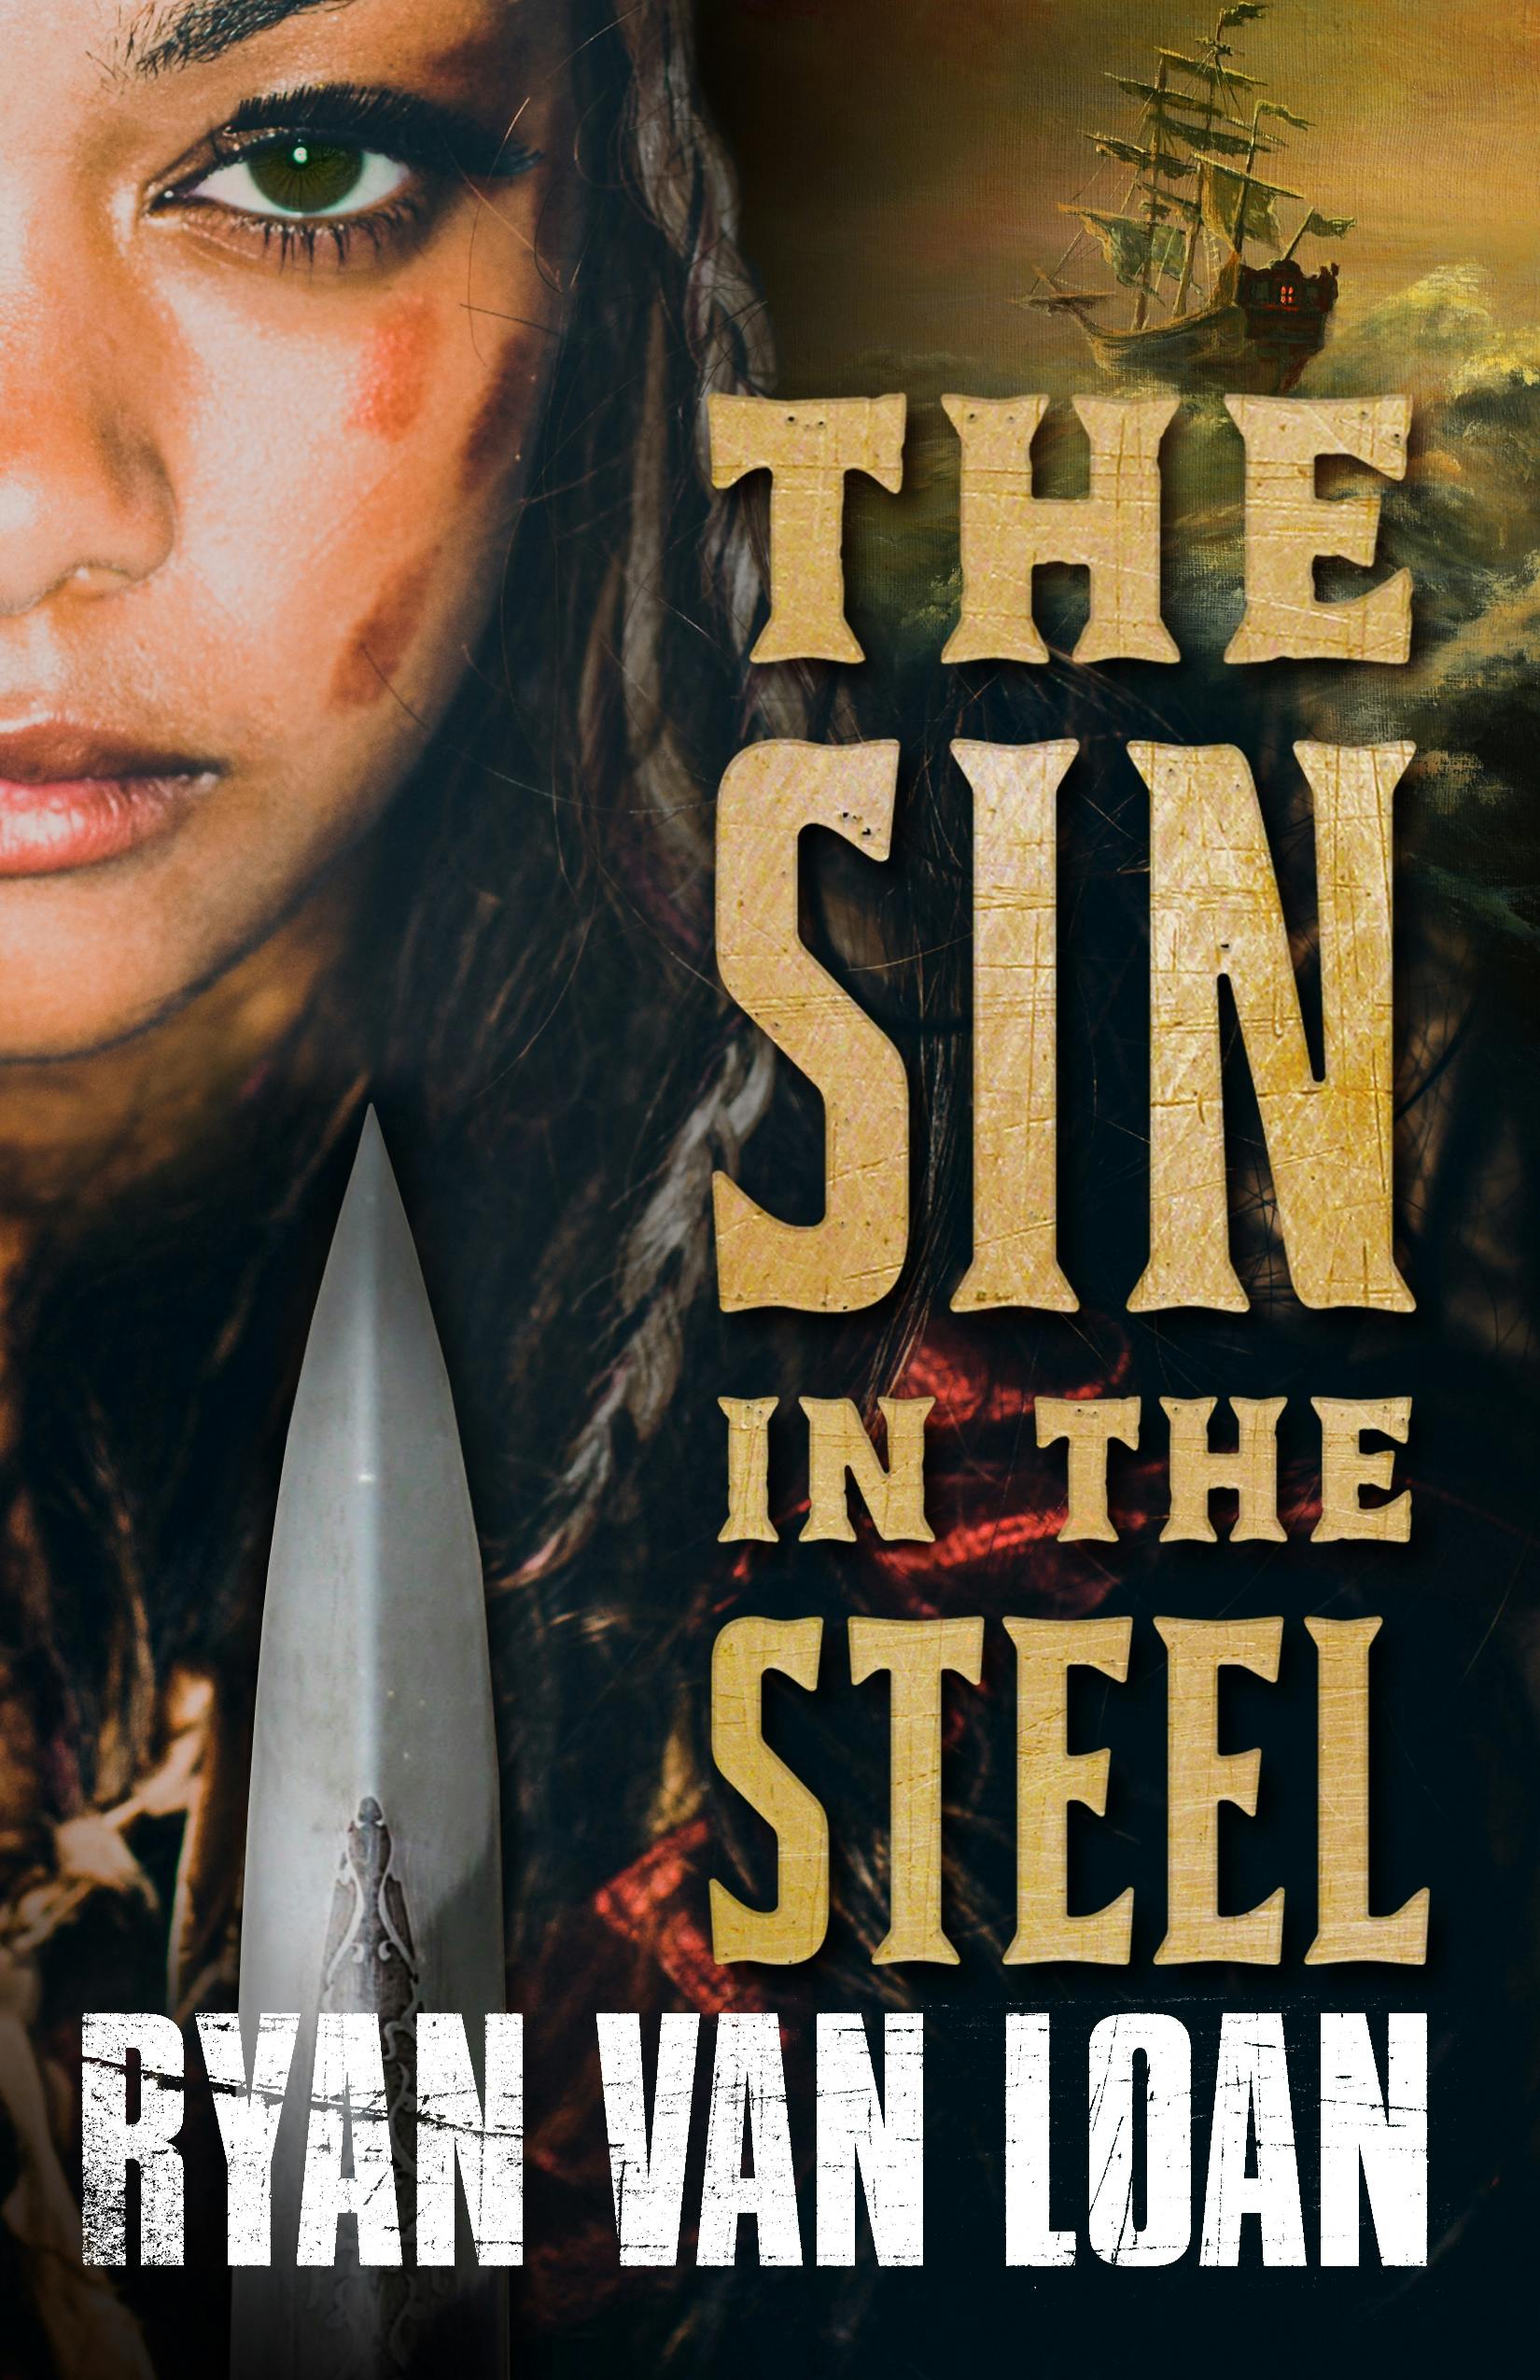 Cover for the book titled as: The Sin in the Steel